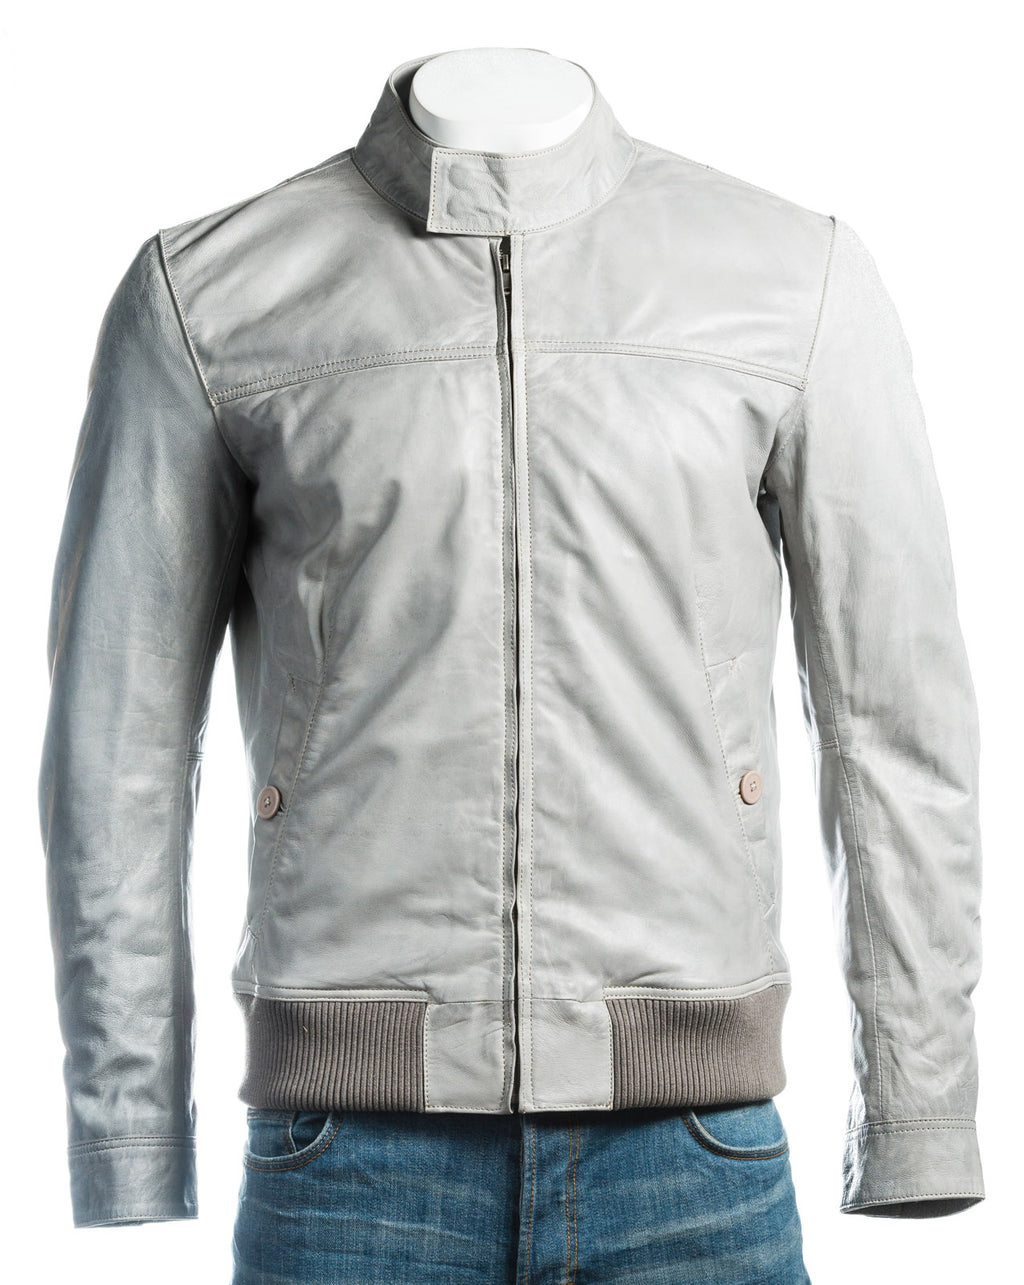 Men's Leather Bomber Jacket With Stand-Up Stud Fastening Collar: Romolo